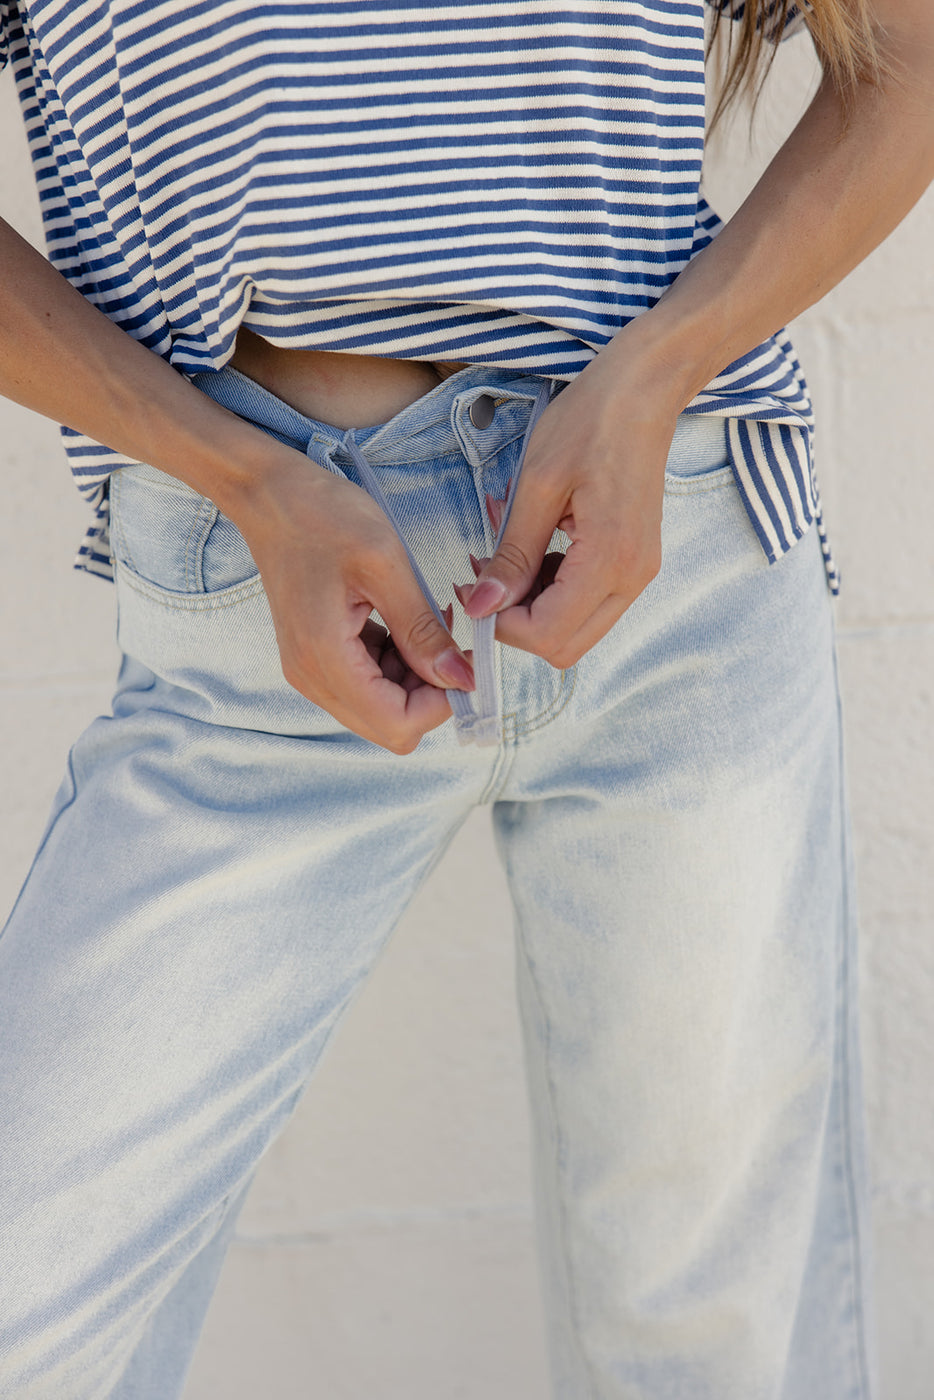 a person wearing blue jeans